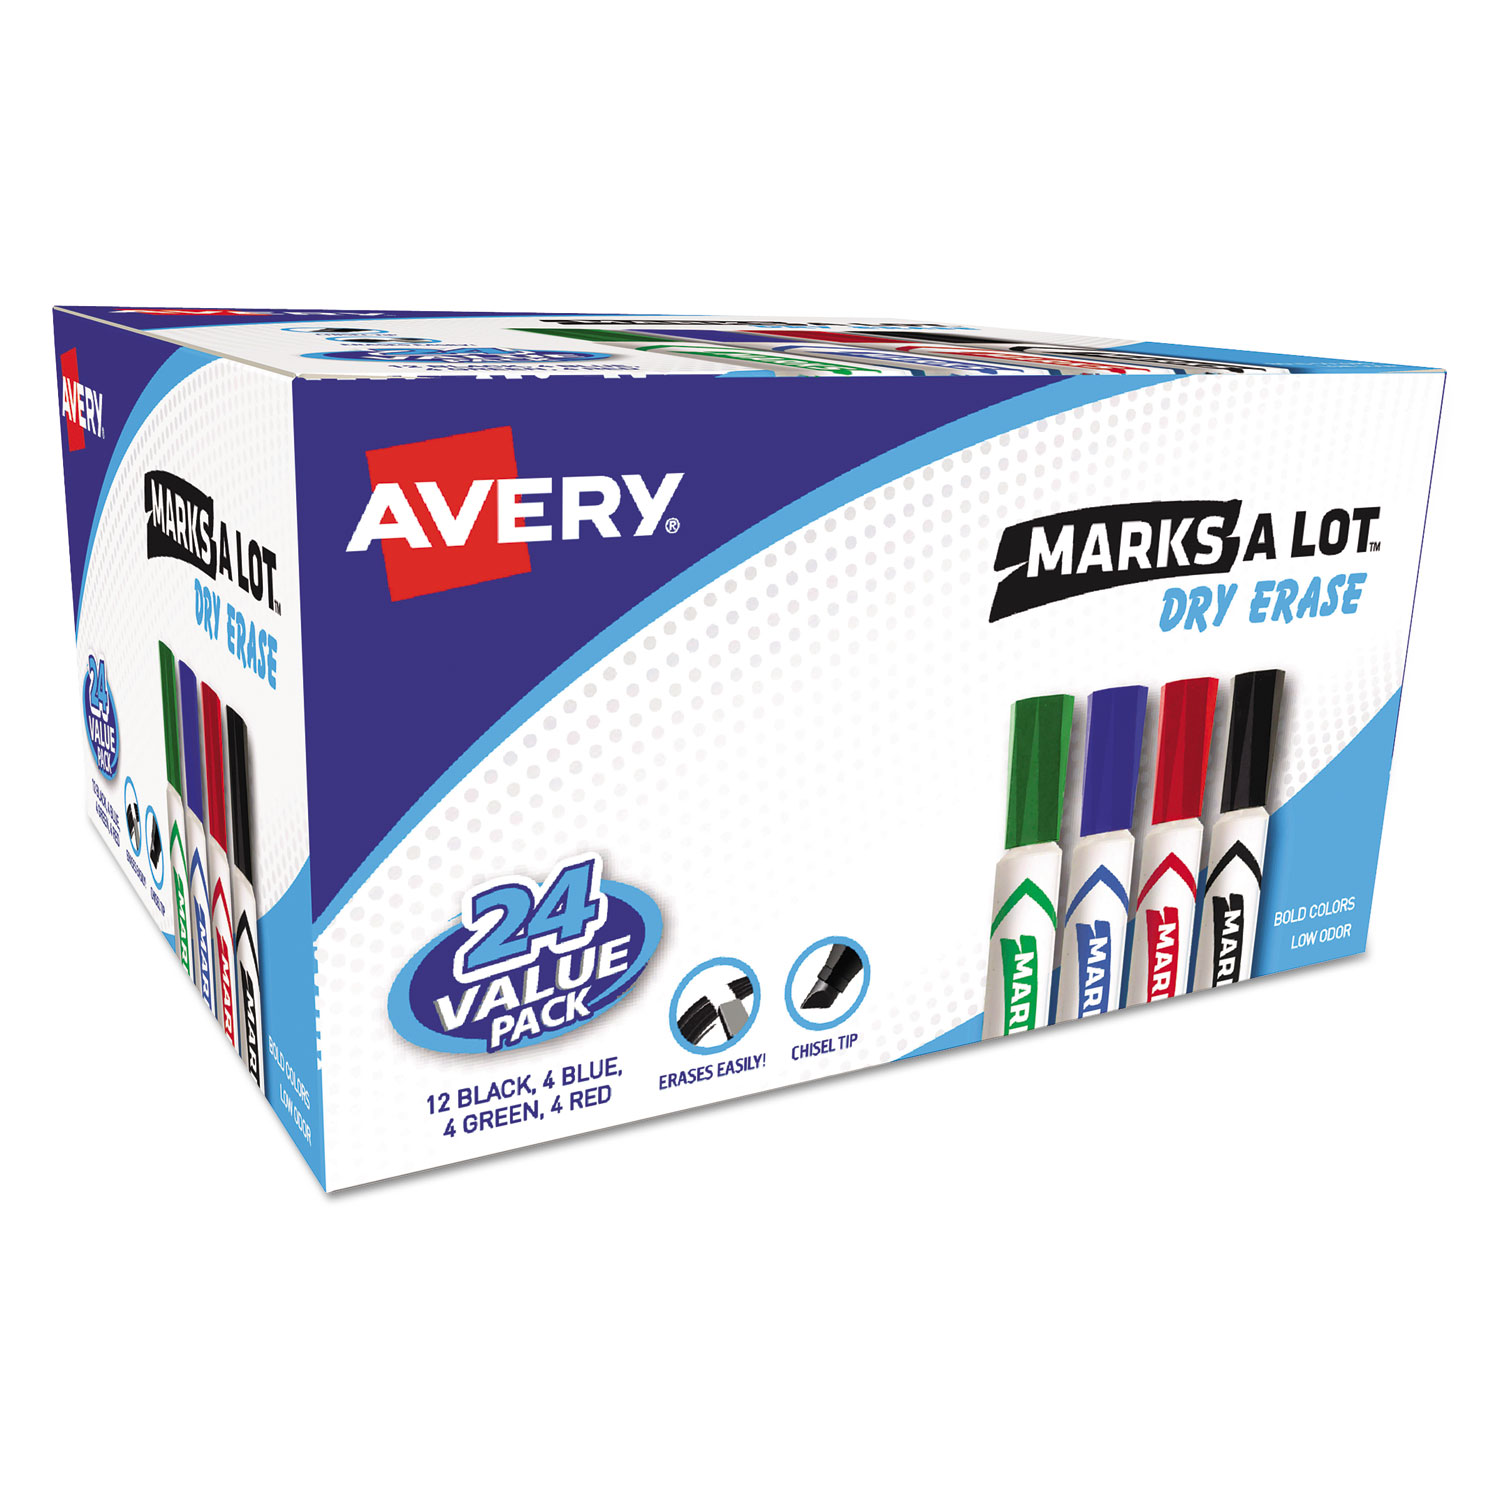  Avery 98188 MARKS A LOT Desk-Style Dry Erase Marker Value Pack, Broad Chisel Tip, Assorted Colors, 24/Pack (AVE98188) 